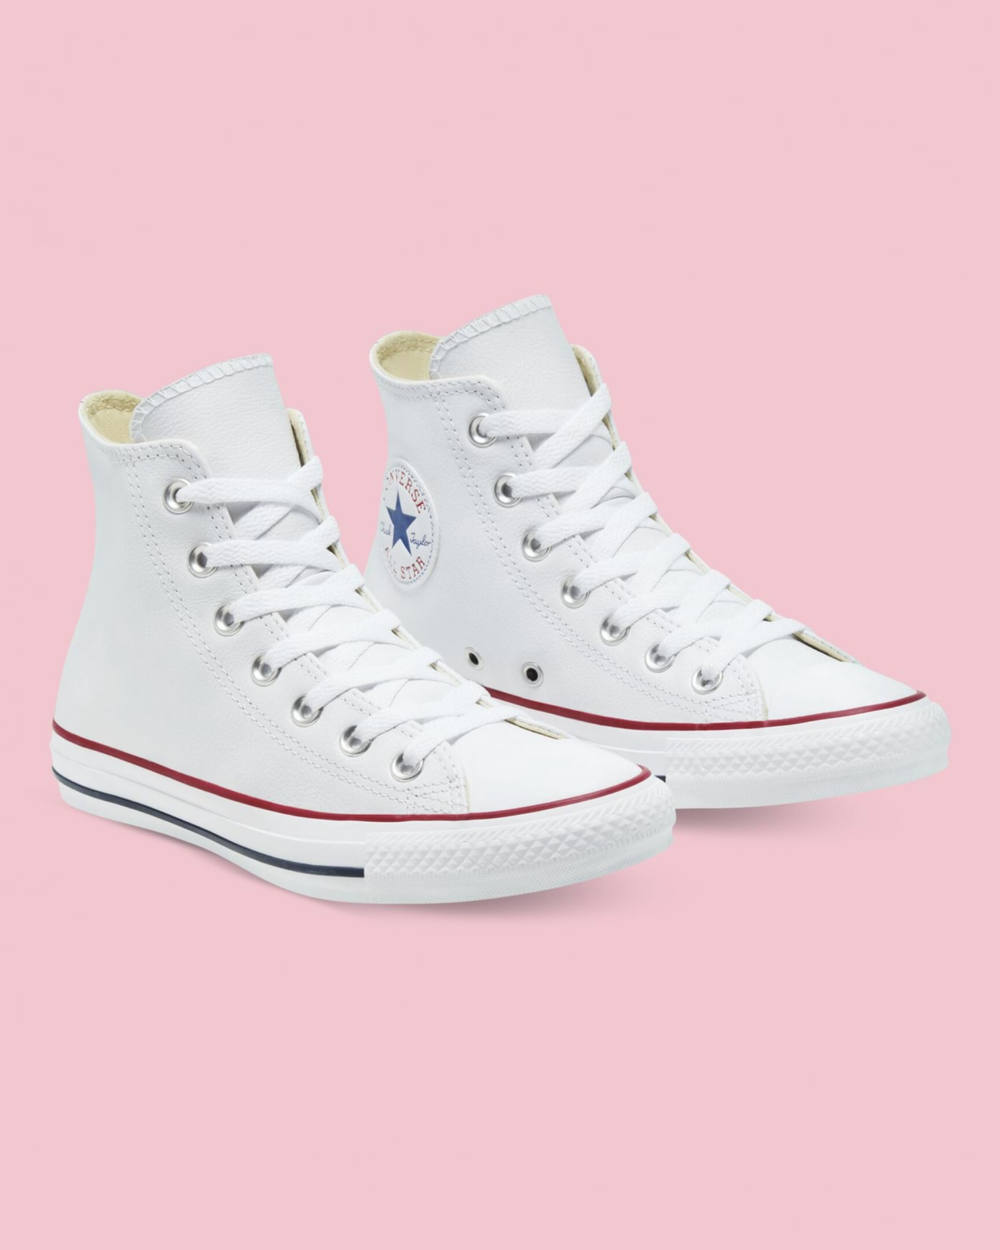 Converse Chuck Taylor Leather High Top - White